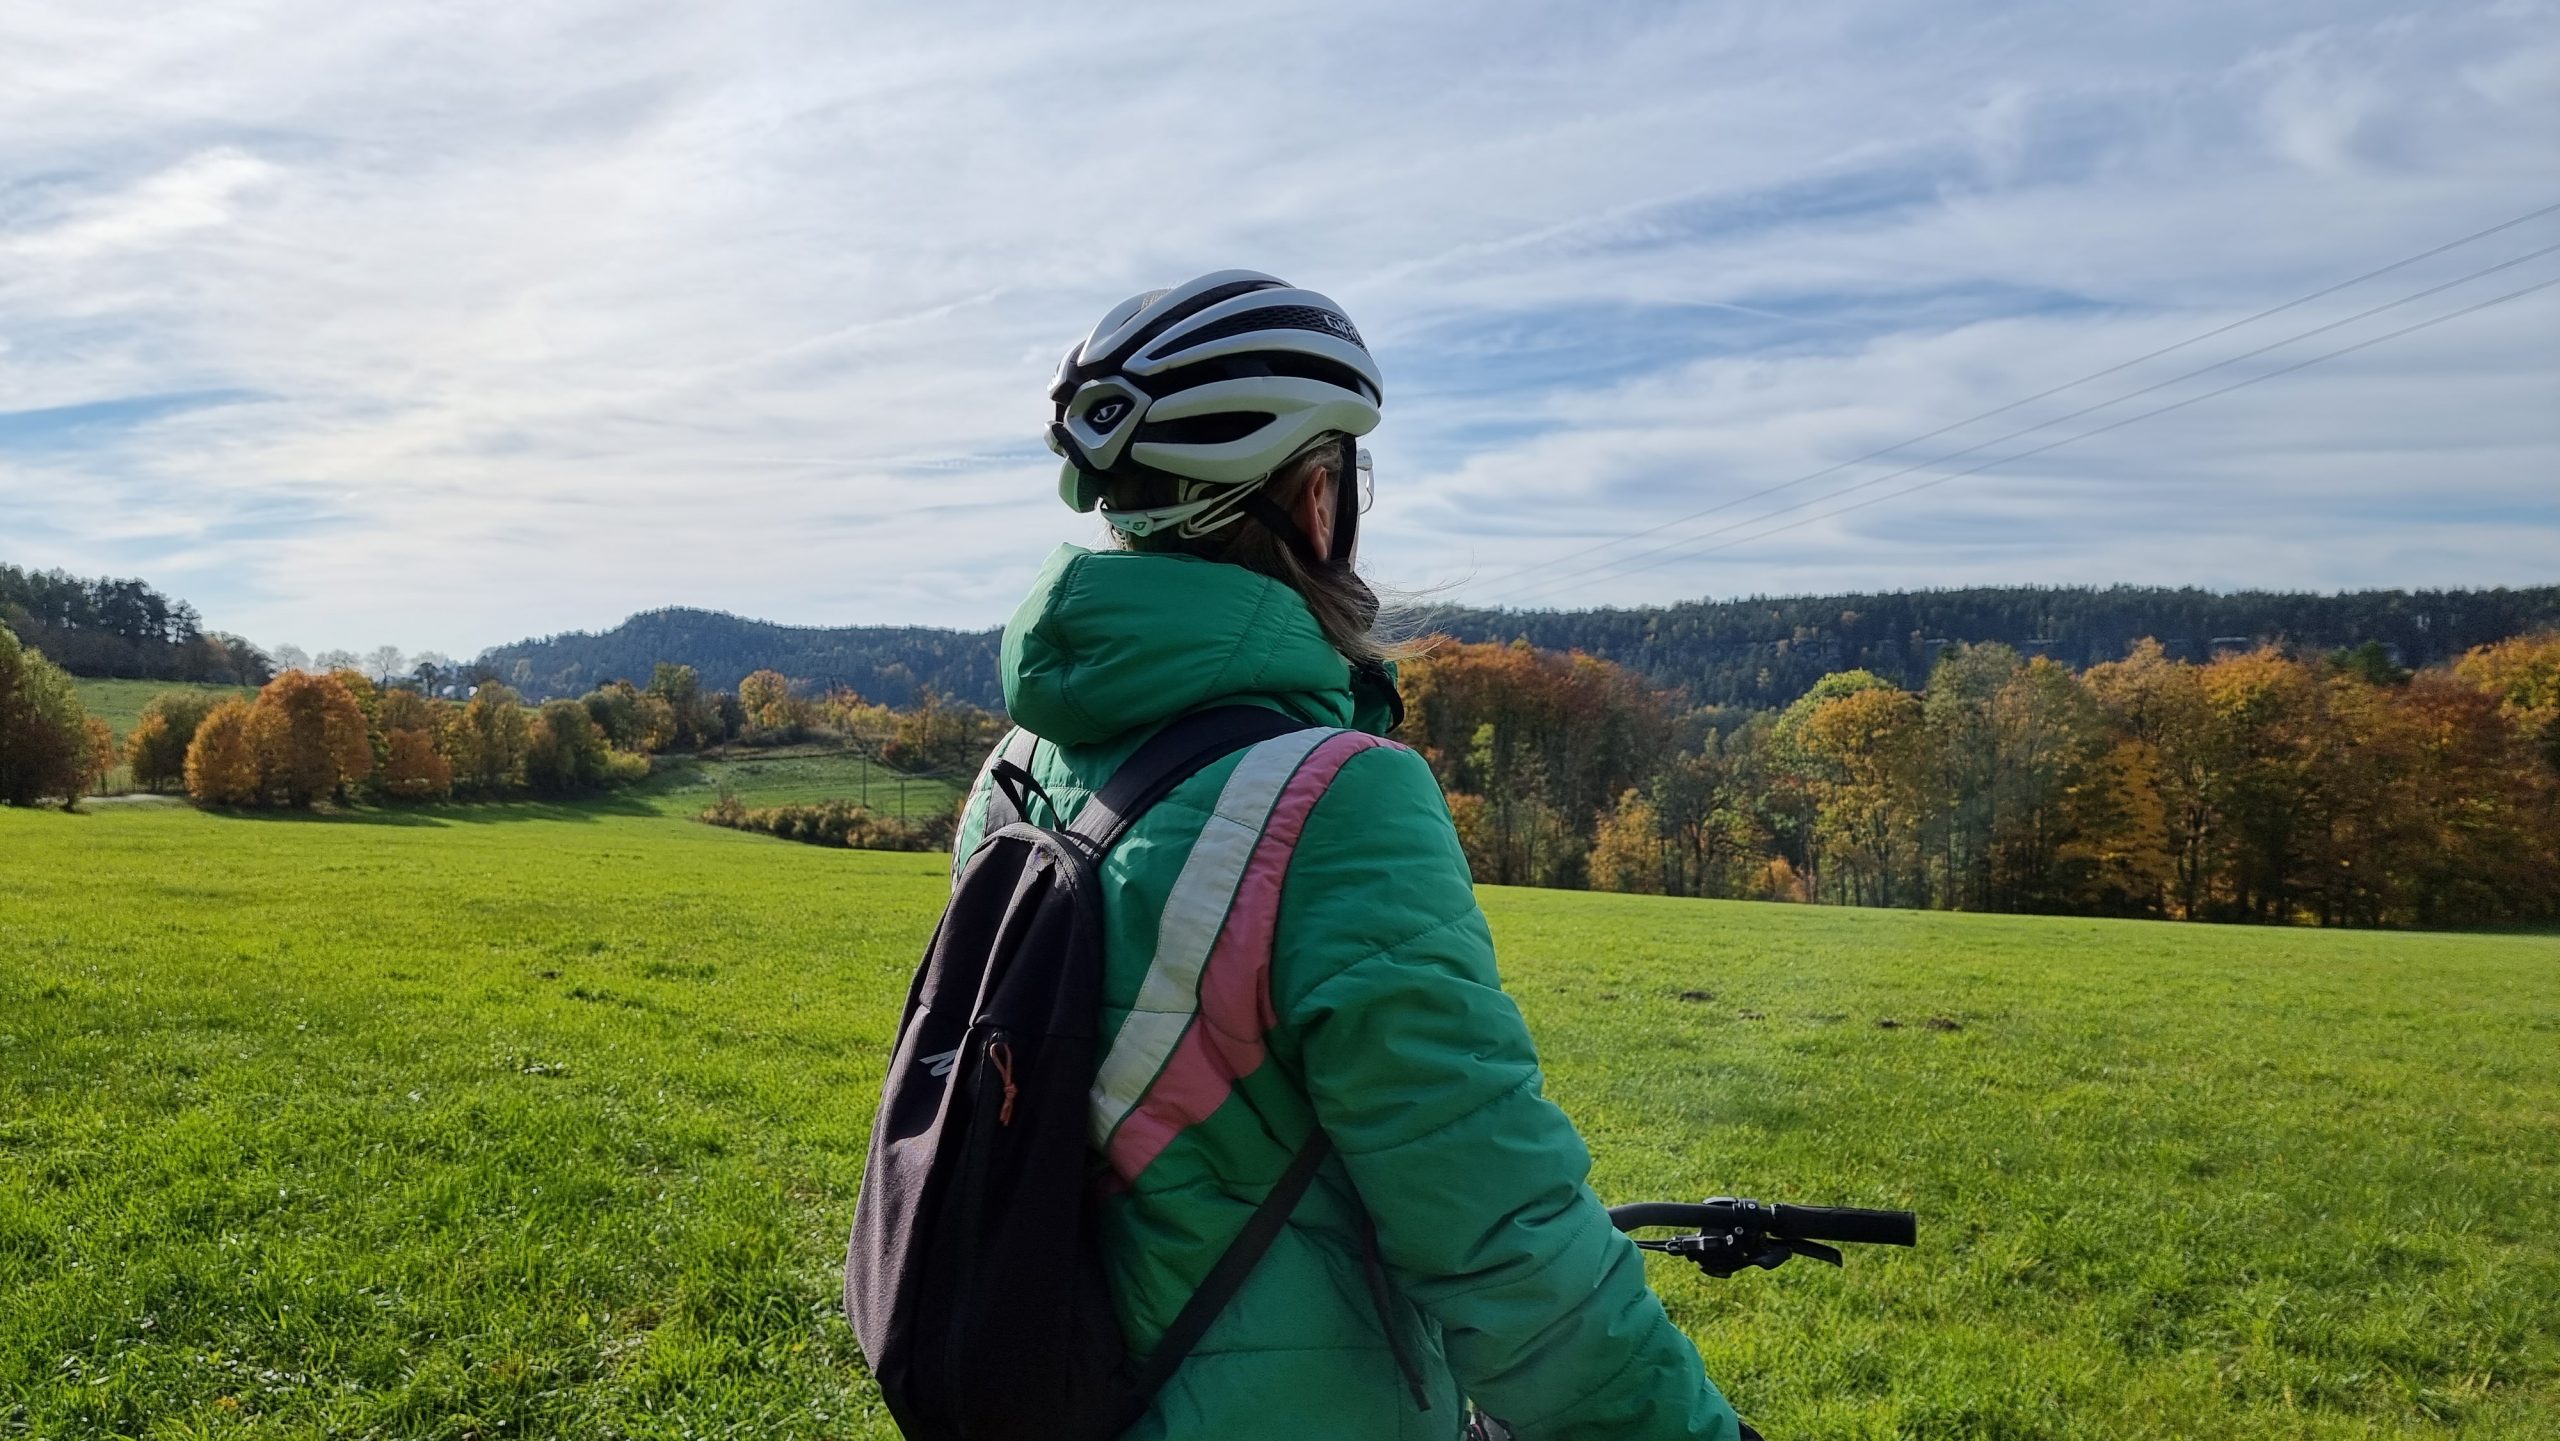 Bohemian Paradise cycling holiday – self guided in your own pace